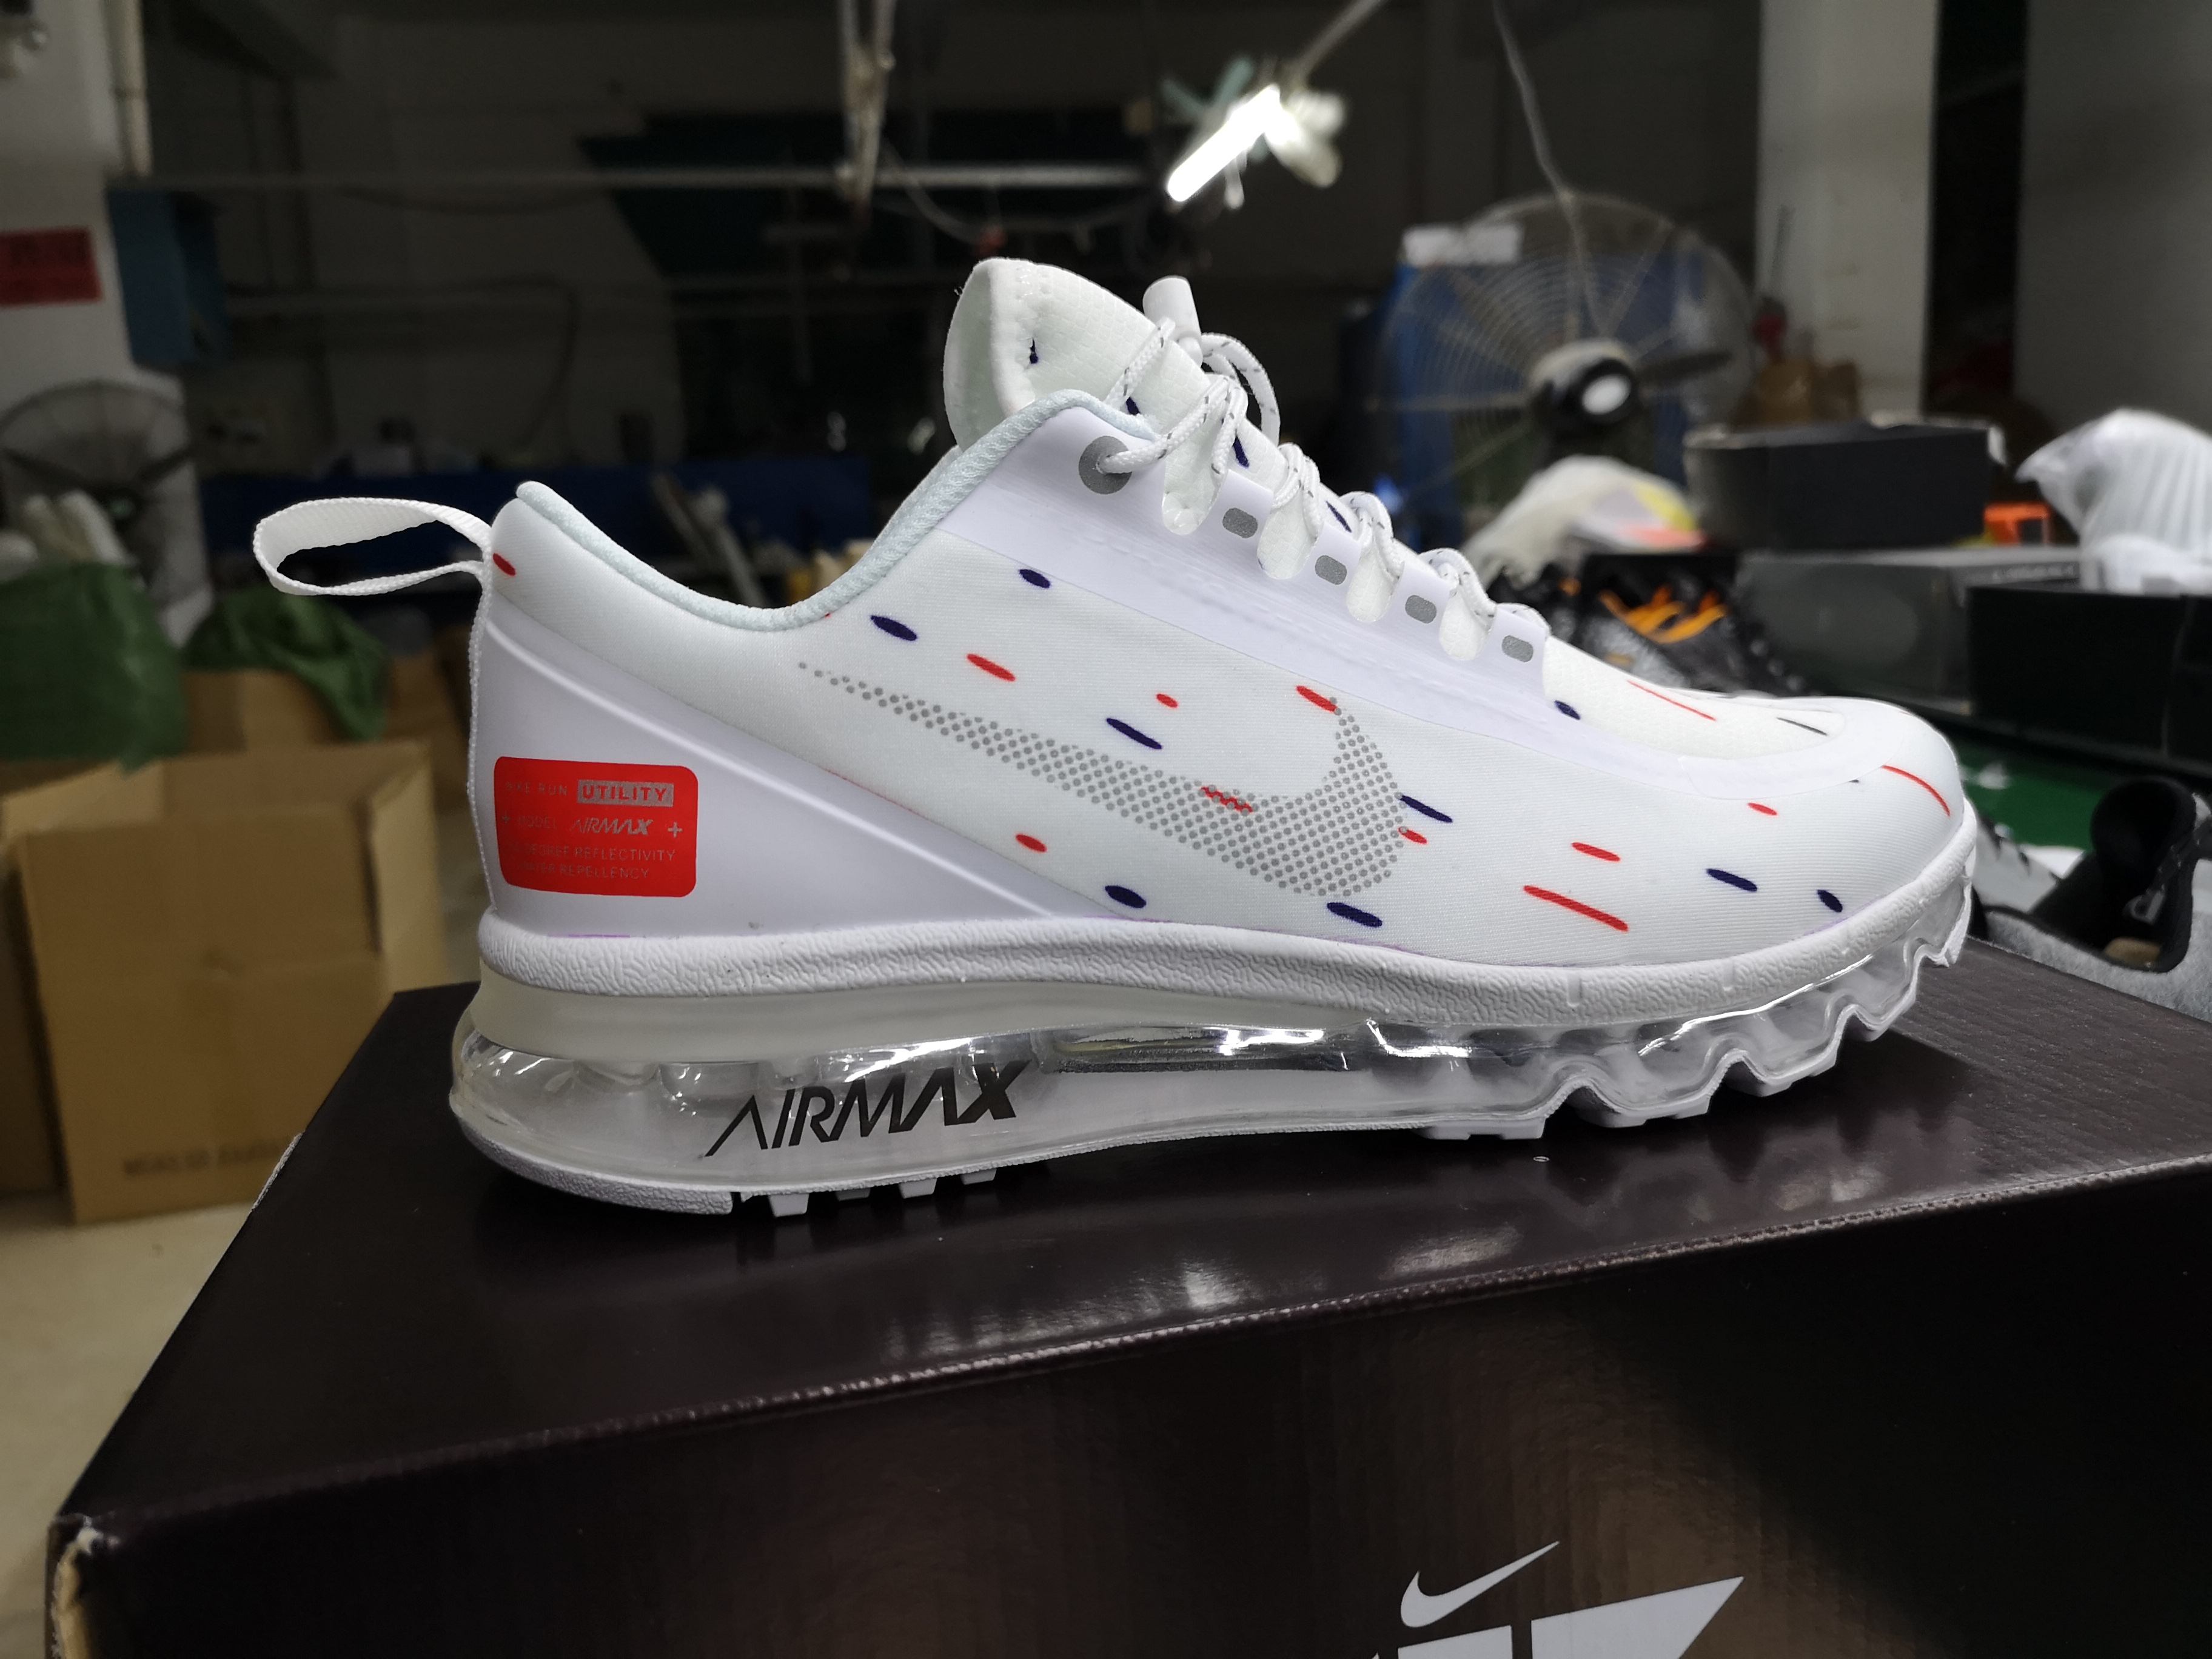 Nike Air Max 2017 Waterproof White Silver Shoes - Click Image to Close